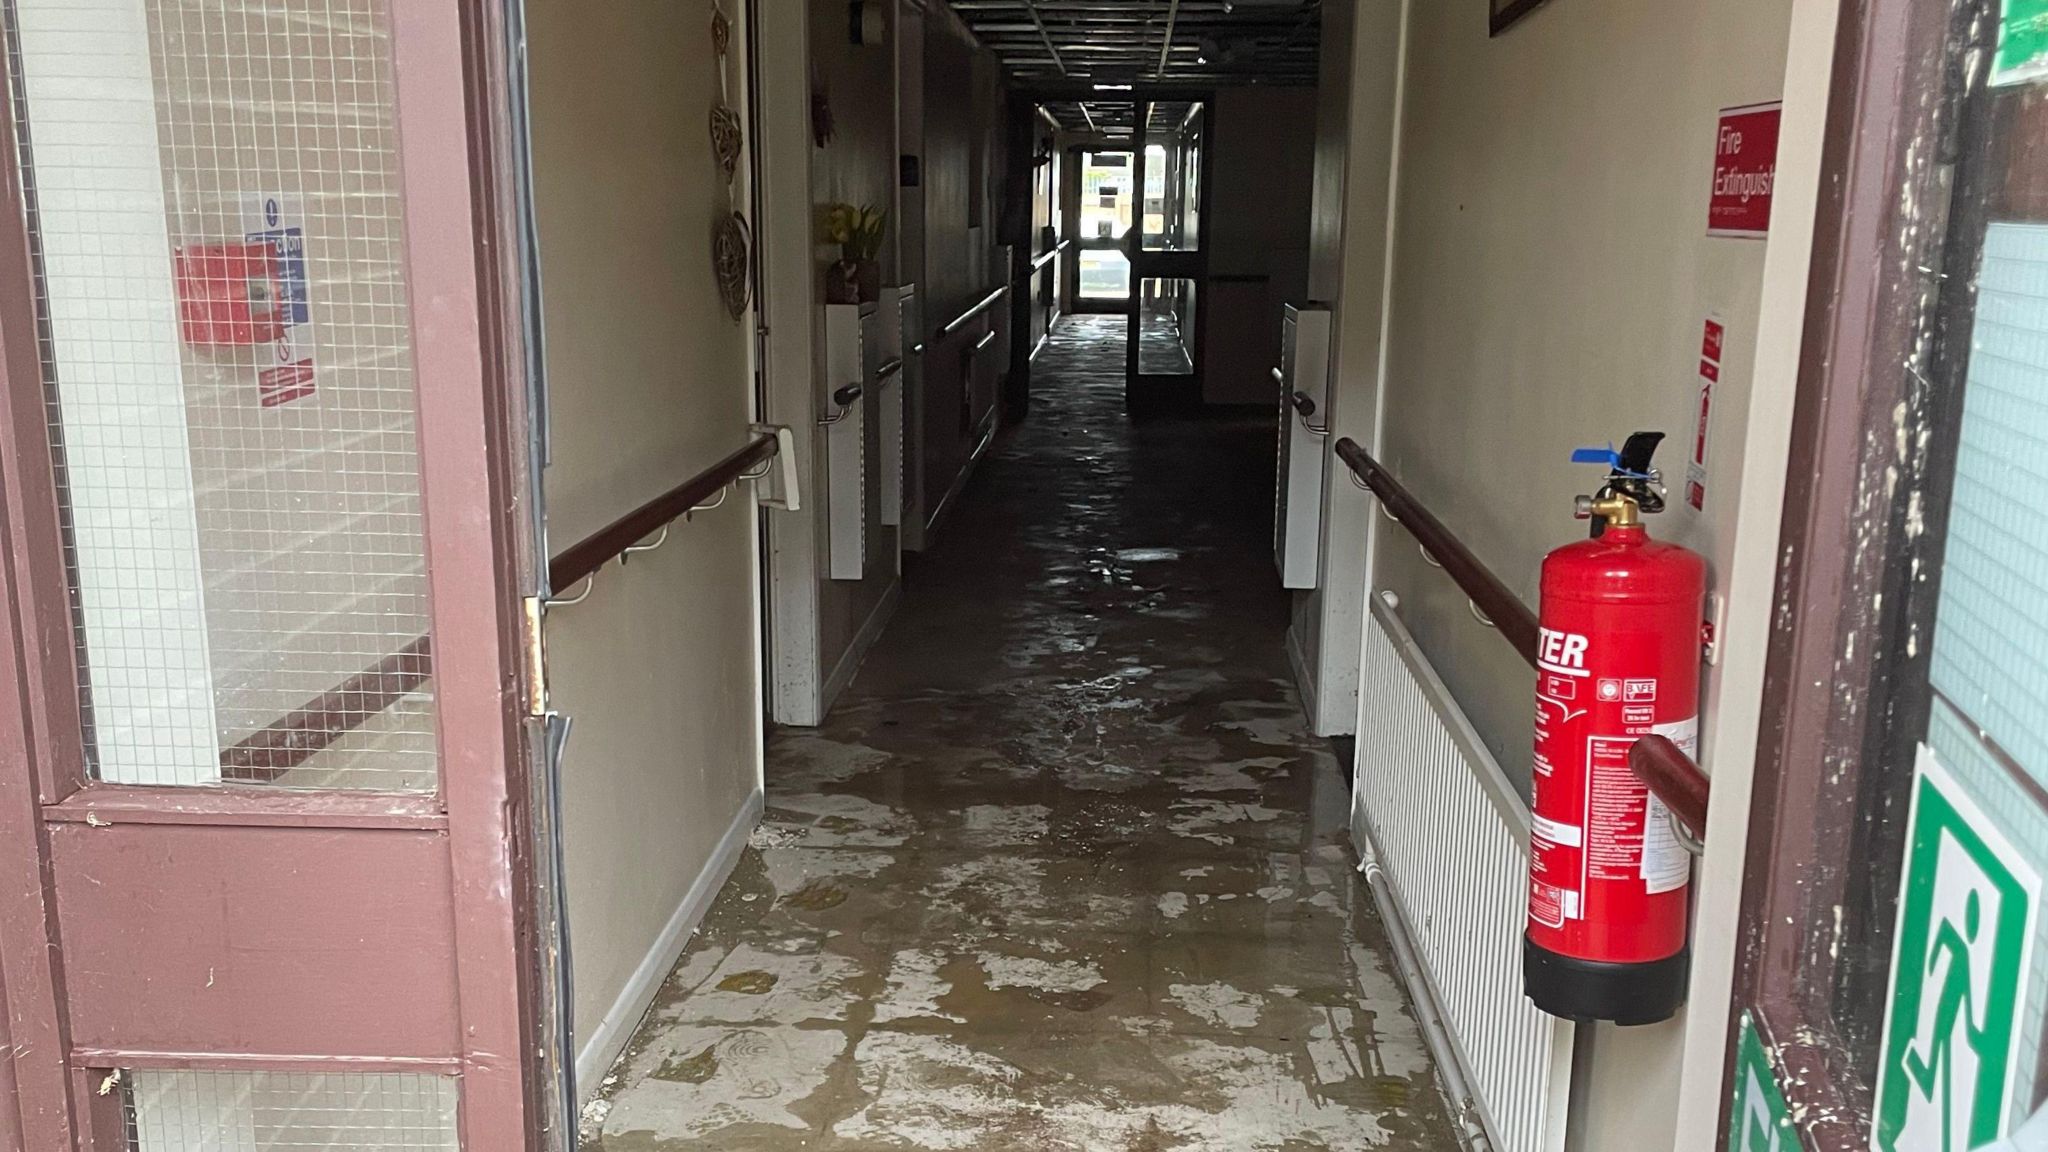 Corridor at Wollongong house, showing water on floor